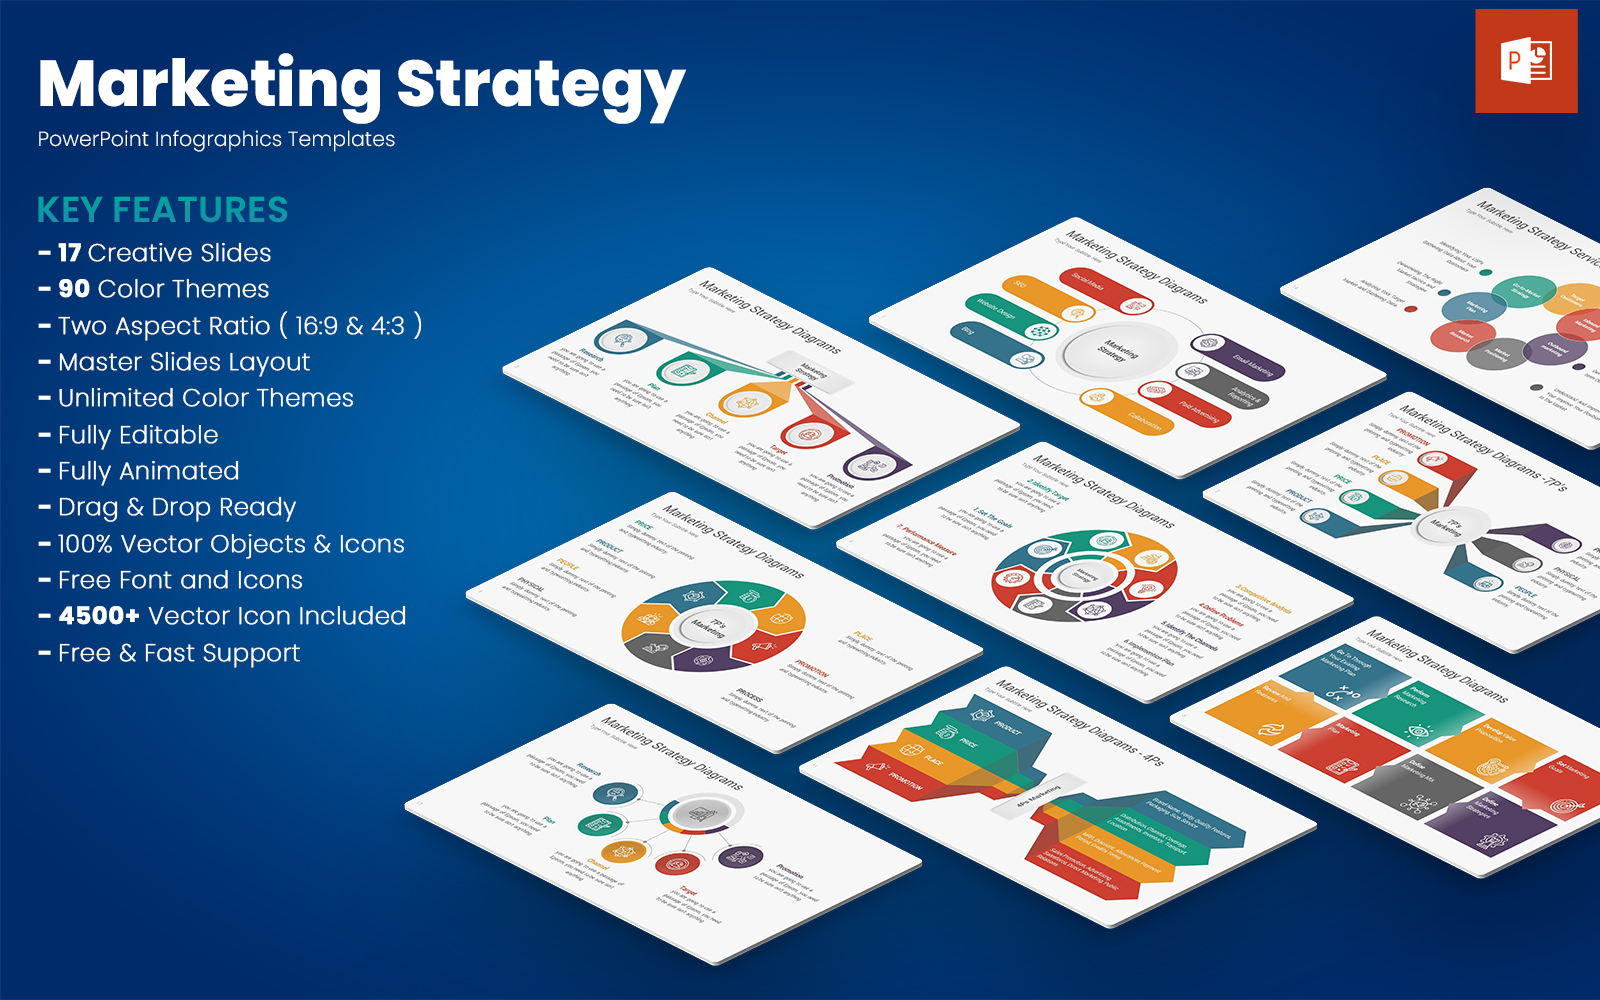 Marketing Strategy PowerPoint Templates